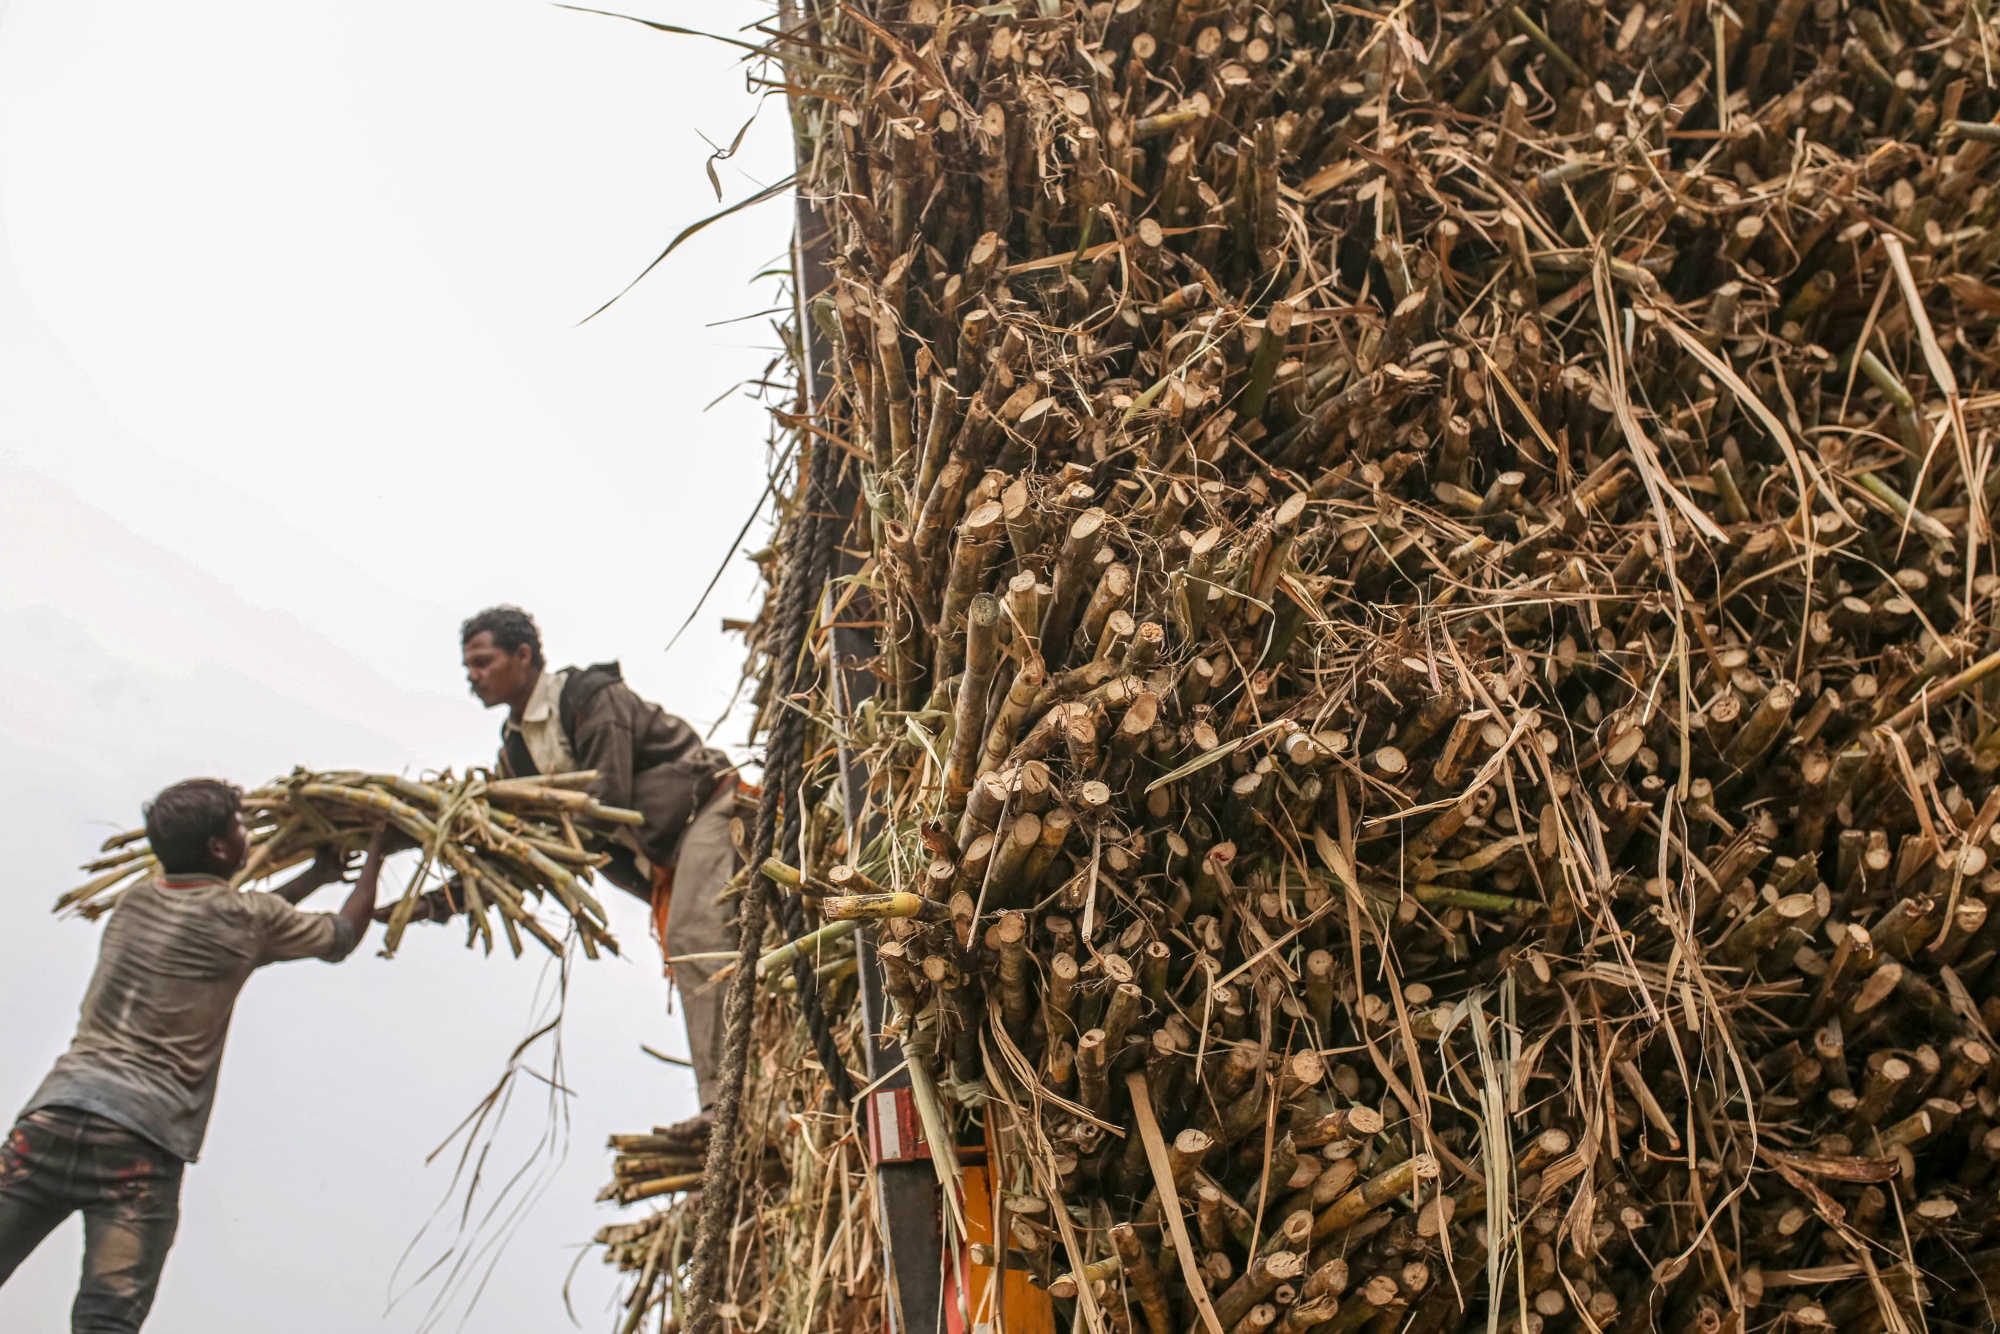 Workers load a bundle of sugarcane onto a truck while harvesting the crop in the Jalana district of Maharashtra, India, earlier in March.